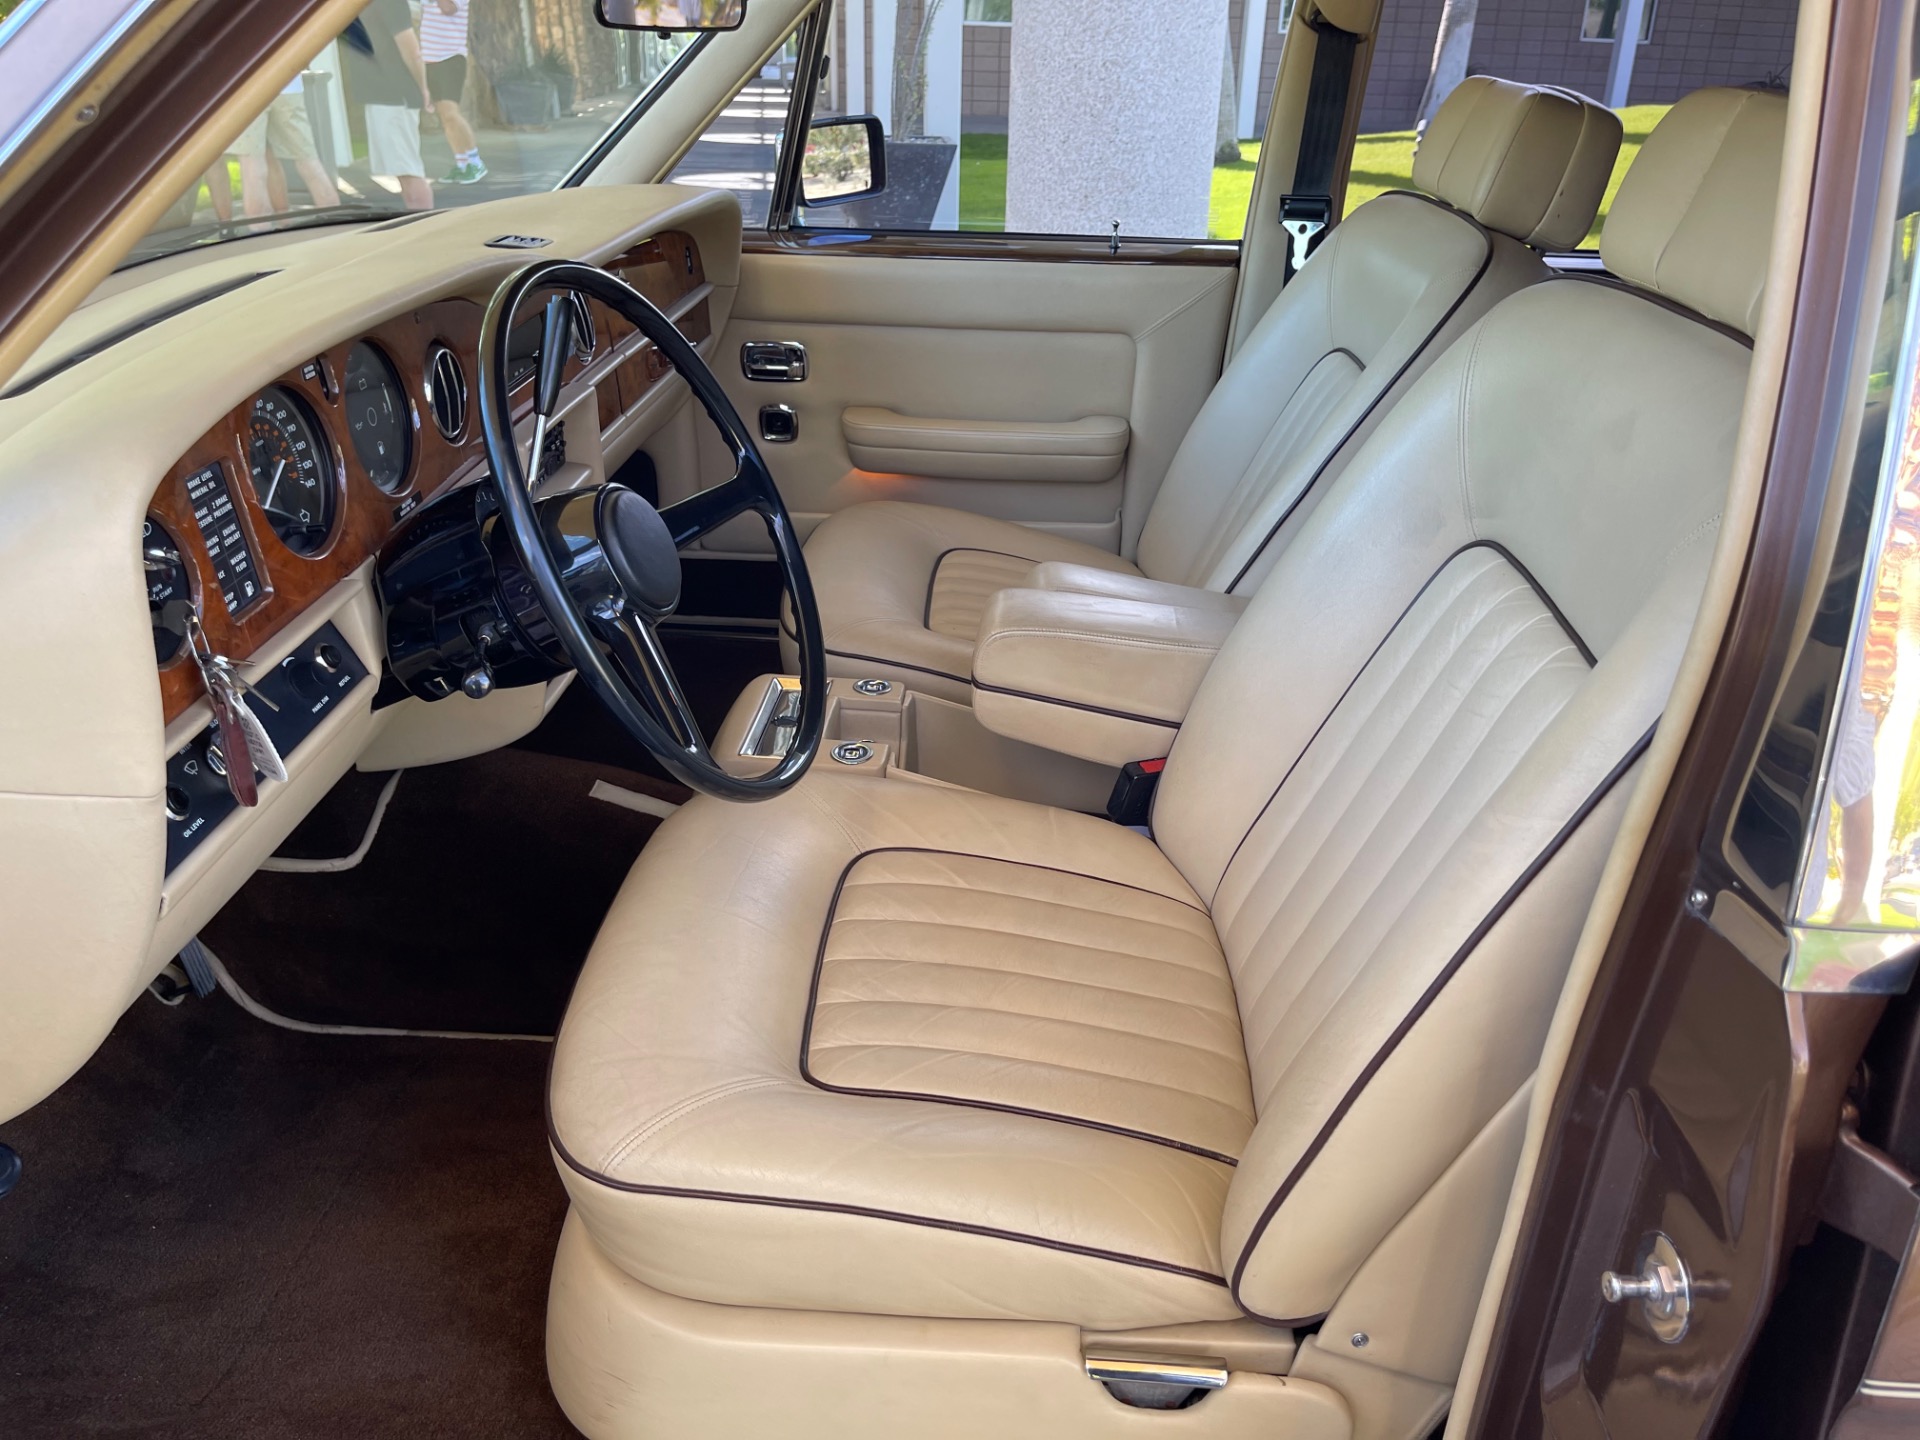 Used-1984-Rolls-Royce-Silver-Spur